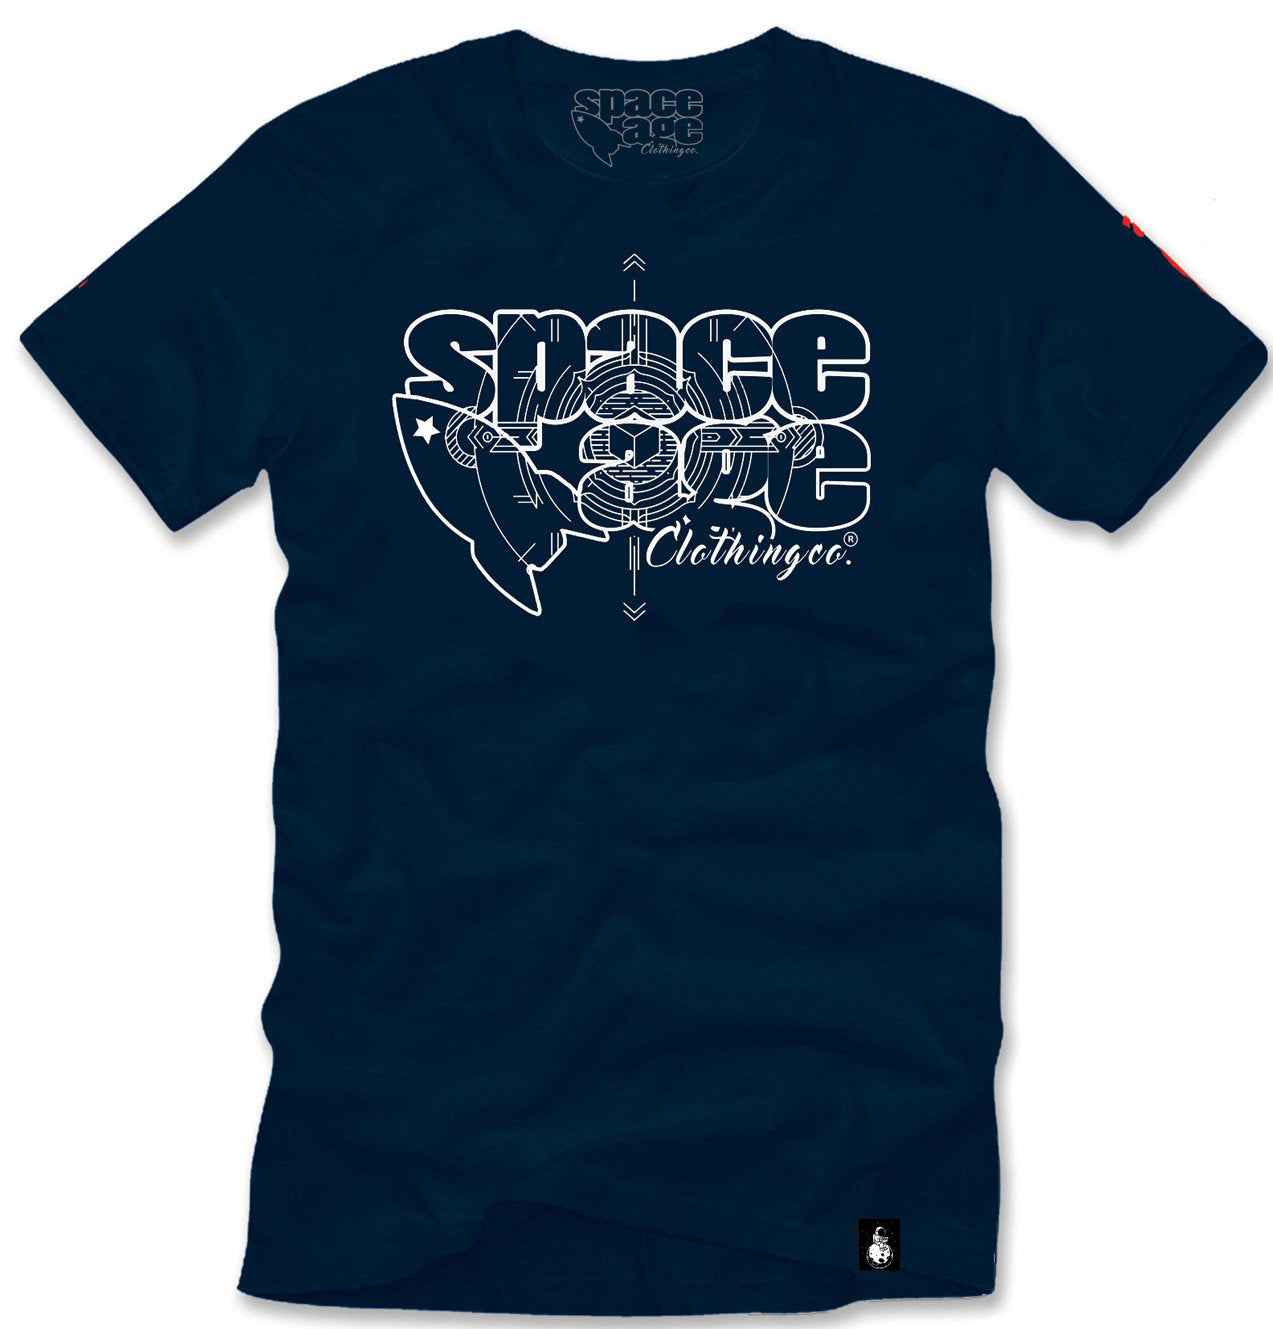 Space Age Clothing Co. T- Shirt  Navy / White